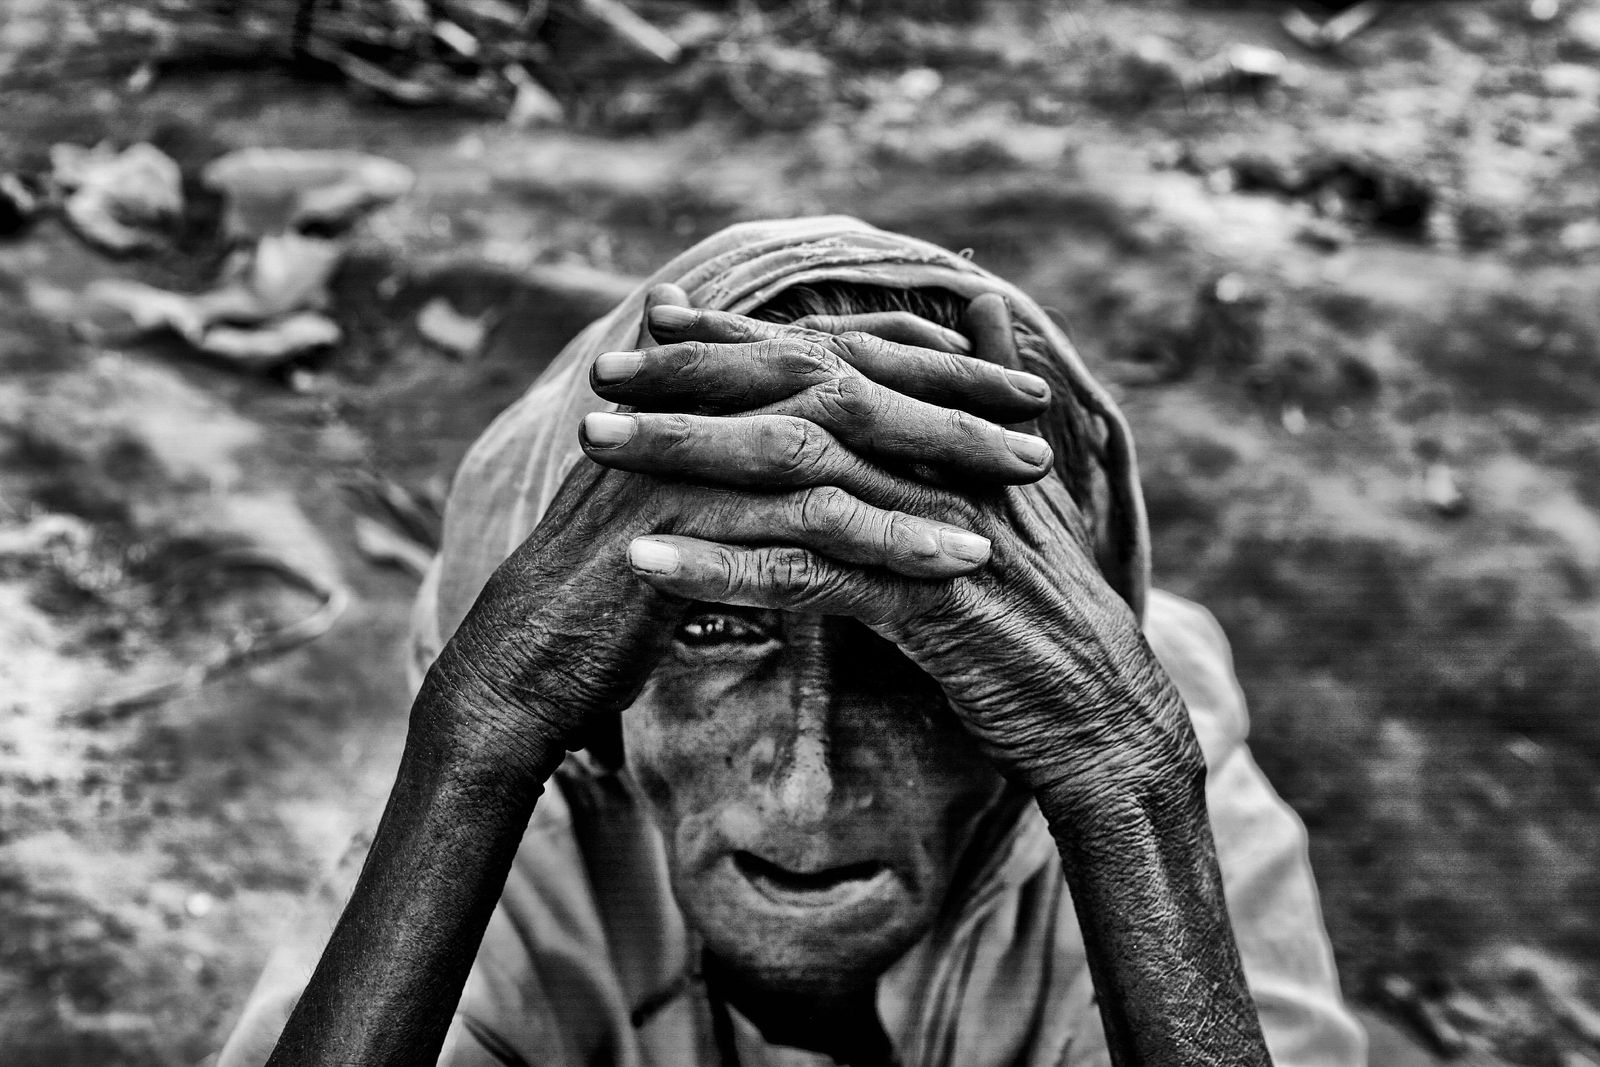 © Mohammad Rakibul Hasan - Nurjahan Begum (90) travels five days to enter Bangladesh from Buthidaung, Myanmar due to the attempt of ethnic cleansing.